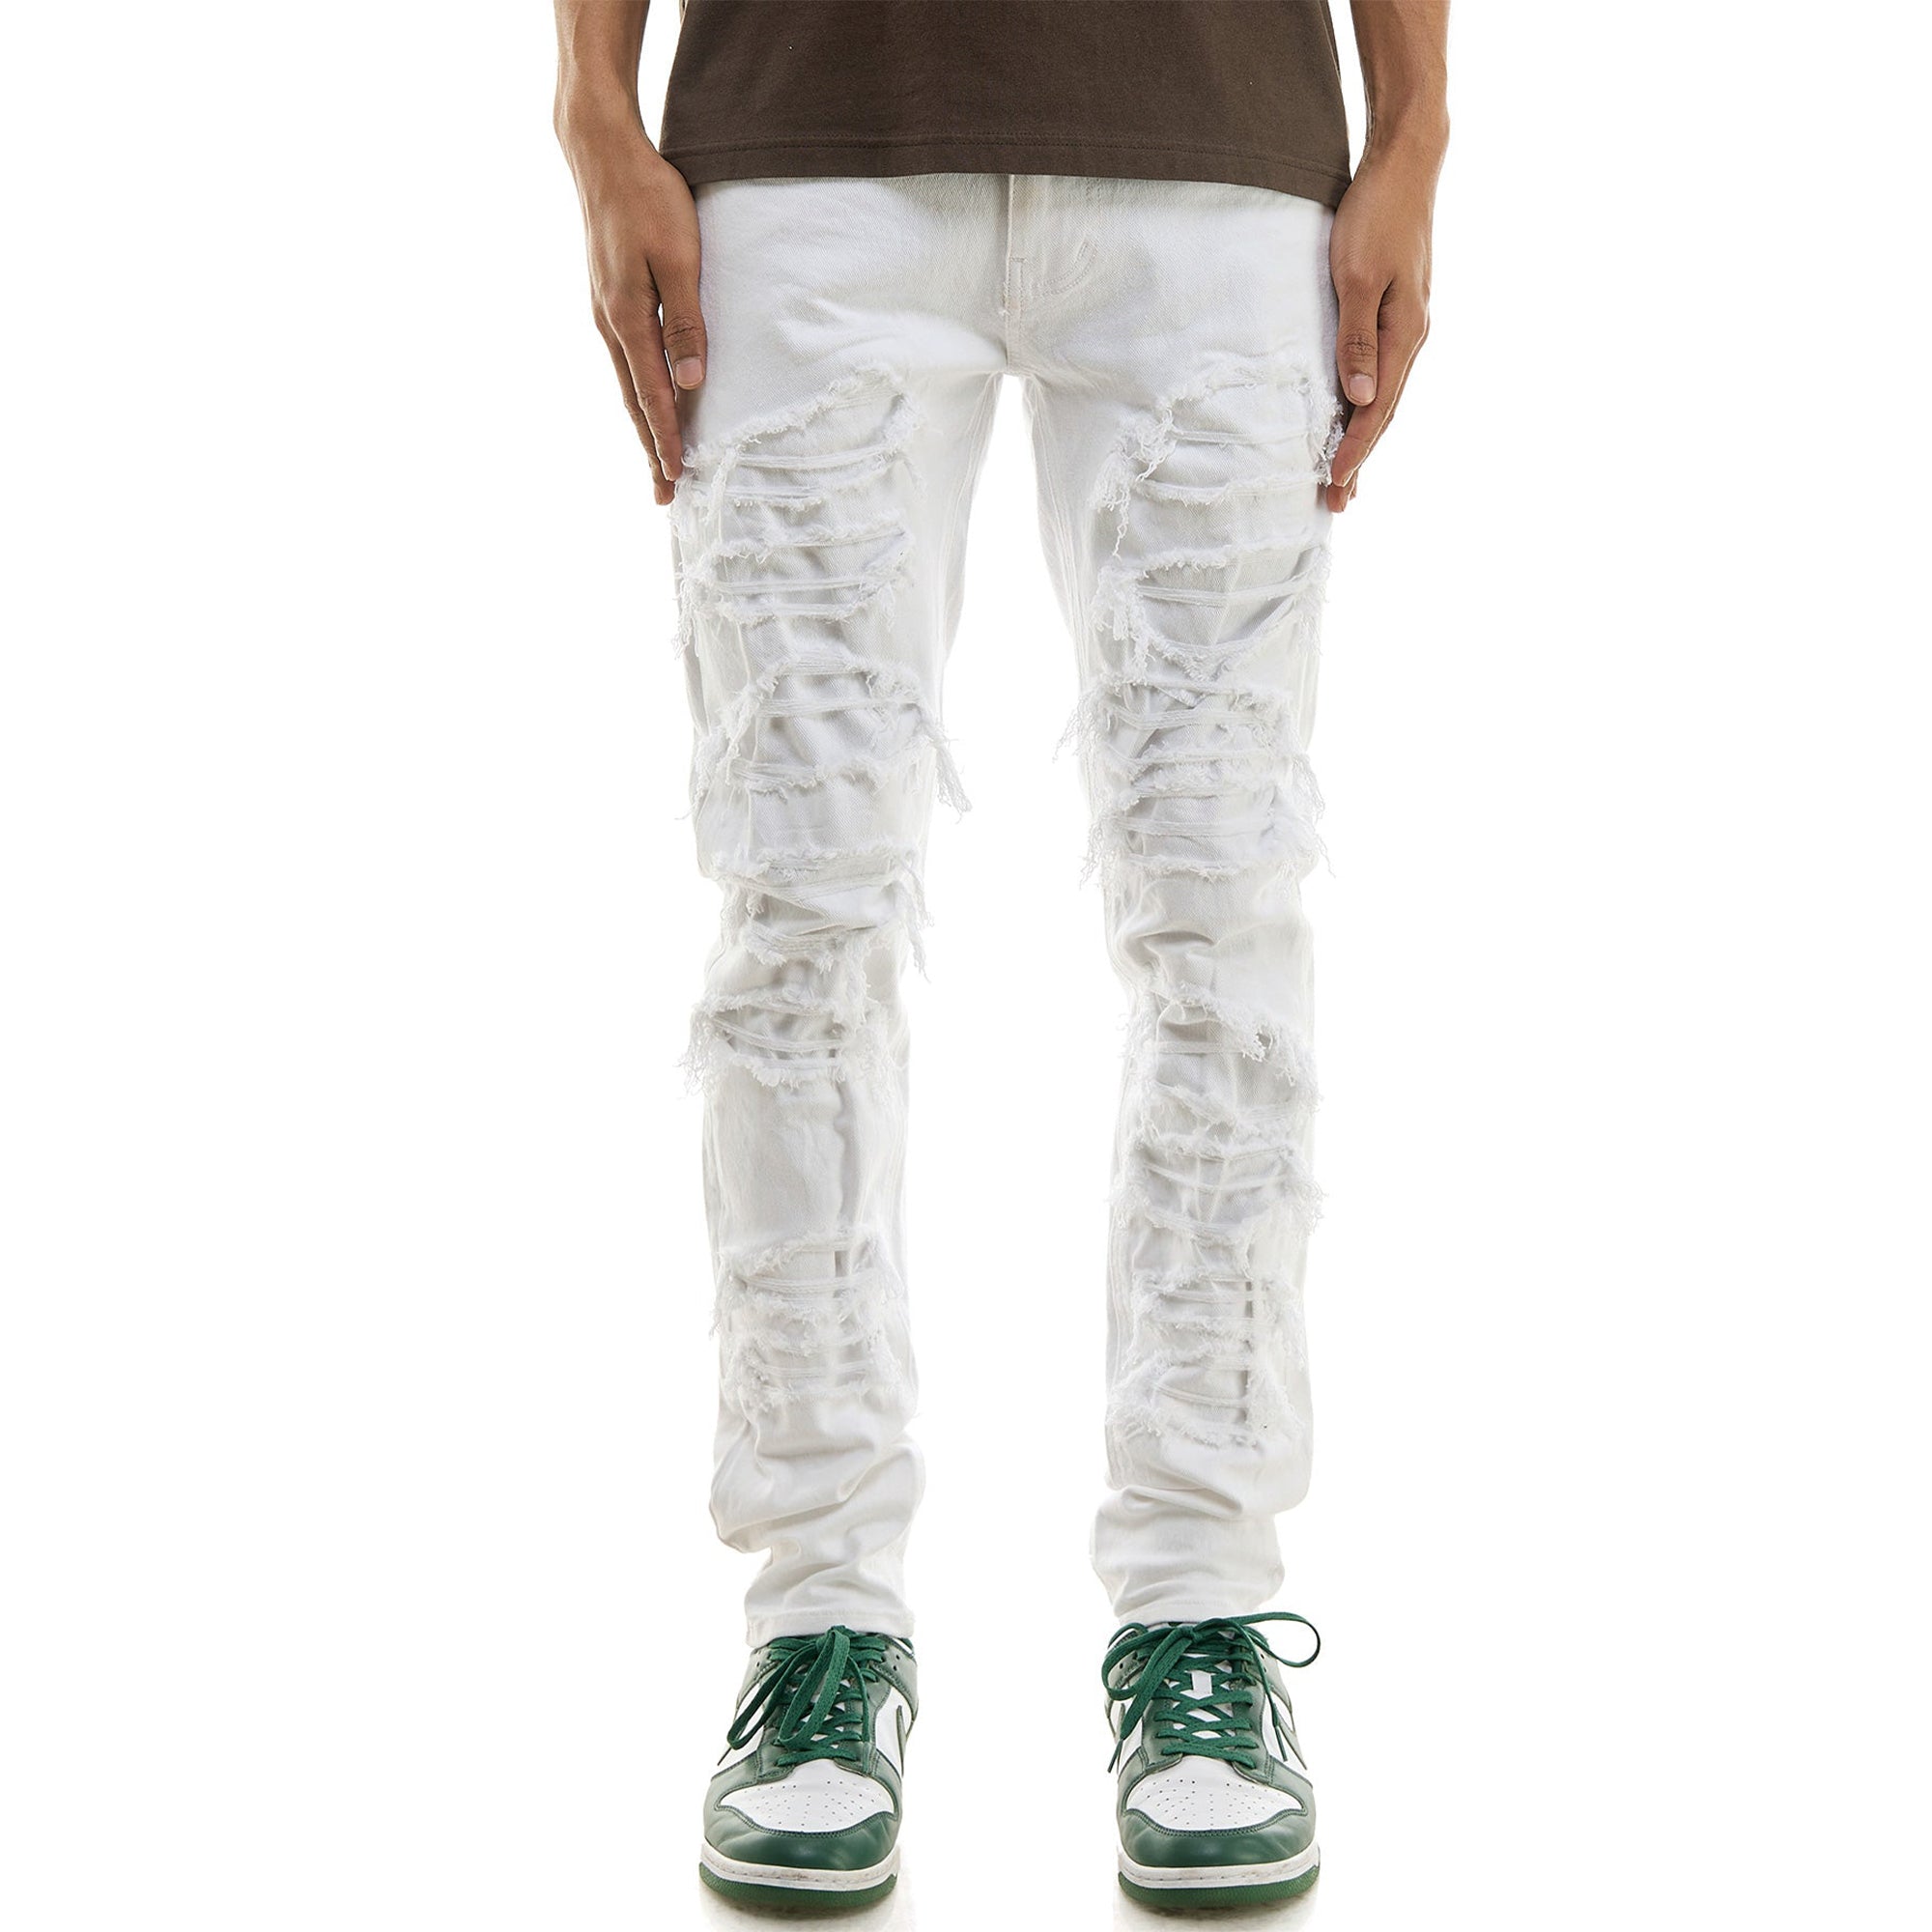 KDNK Men Under Patched More Skinny Jeans (White)-White-28W X 32L-Nexus Clothing